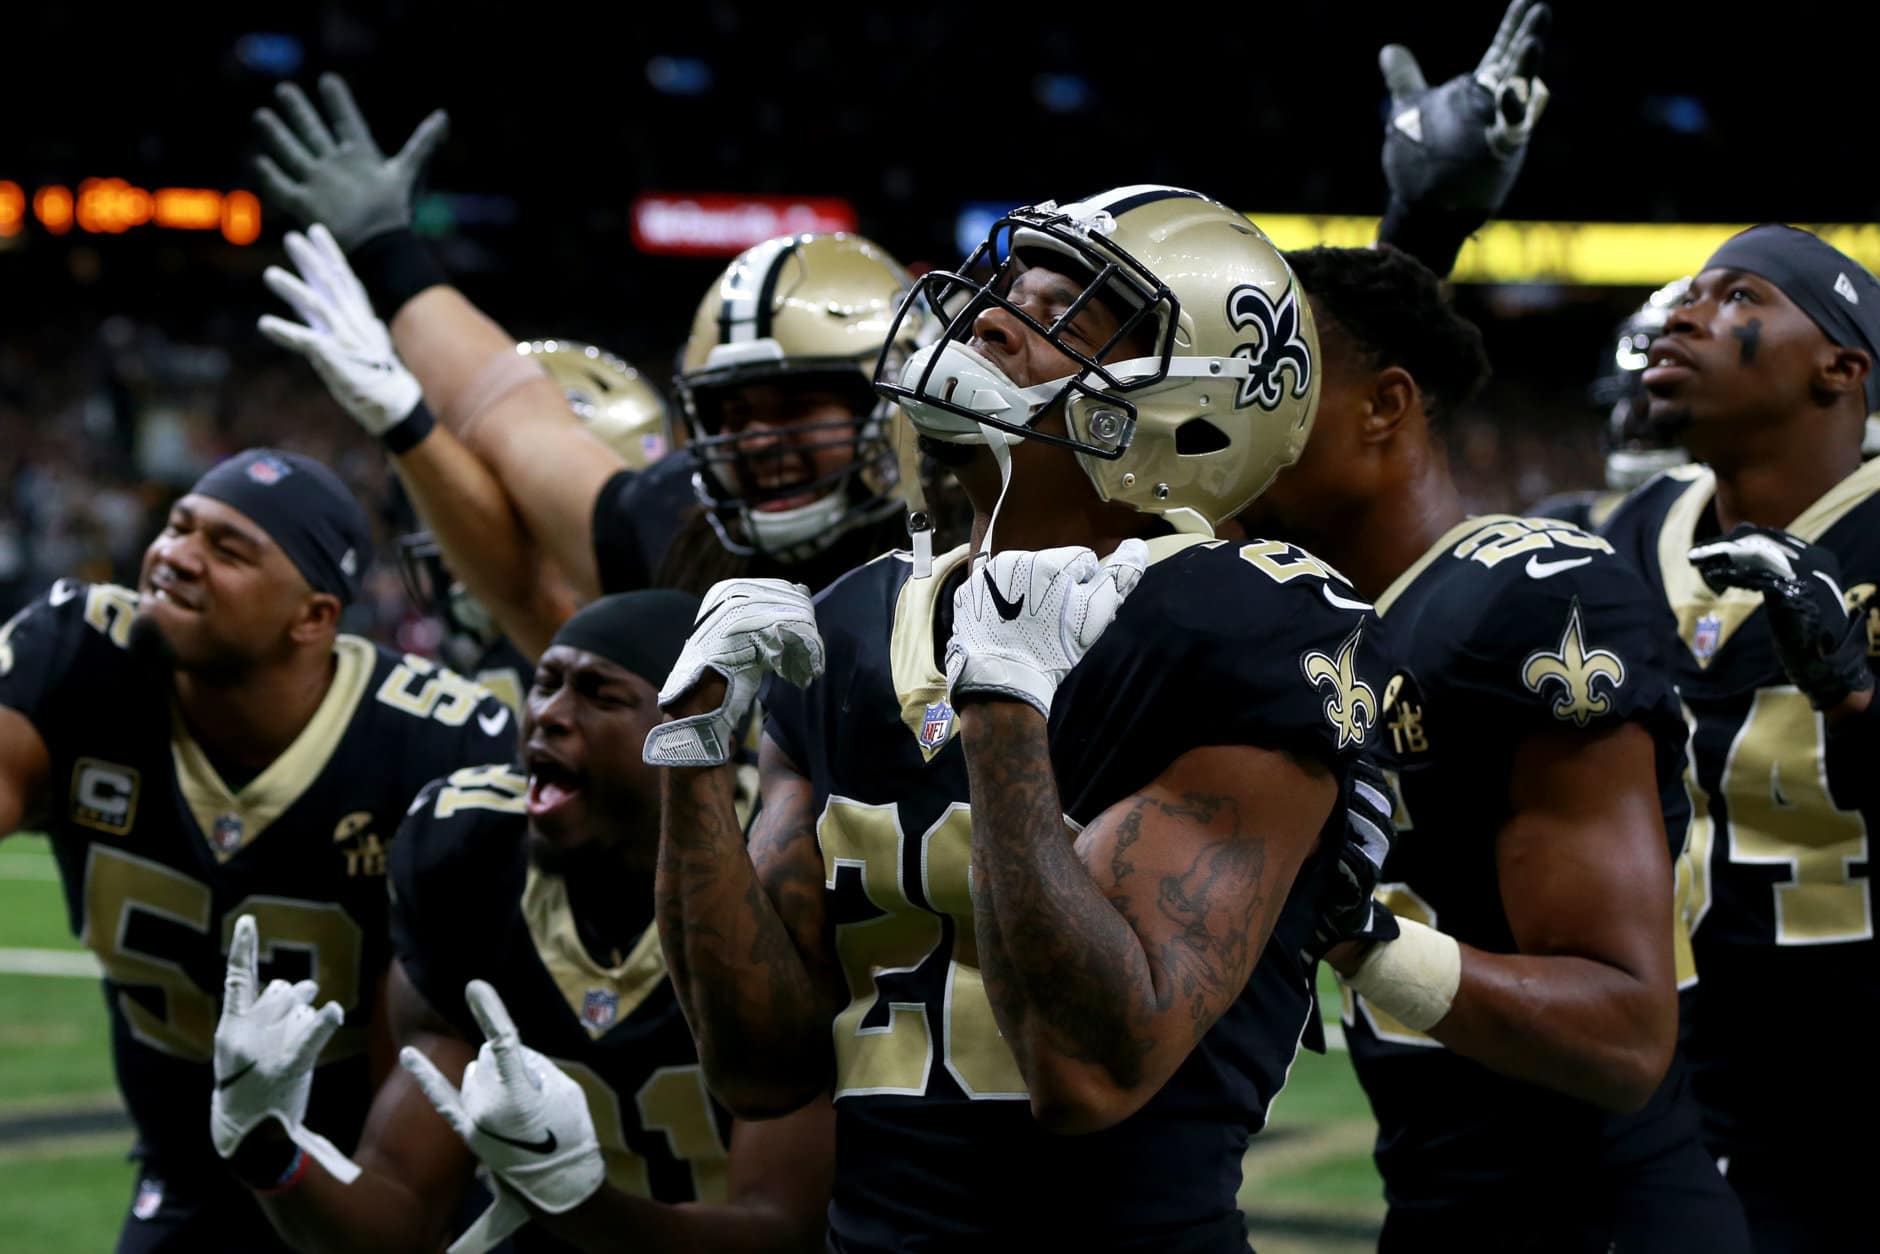 NEW ORLEANS, LOUISIANA - DECEMBER 23: The New Orleans Saints celebrate during the second half against the Pittsburgh Steelers at the Mercedes-Benz Superdome on December 23, 2018 in New Orleans, Louisiana. (Photo by Sean Gardner/Getty Images)